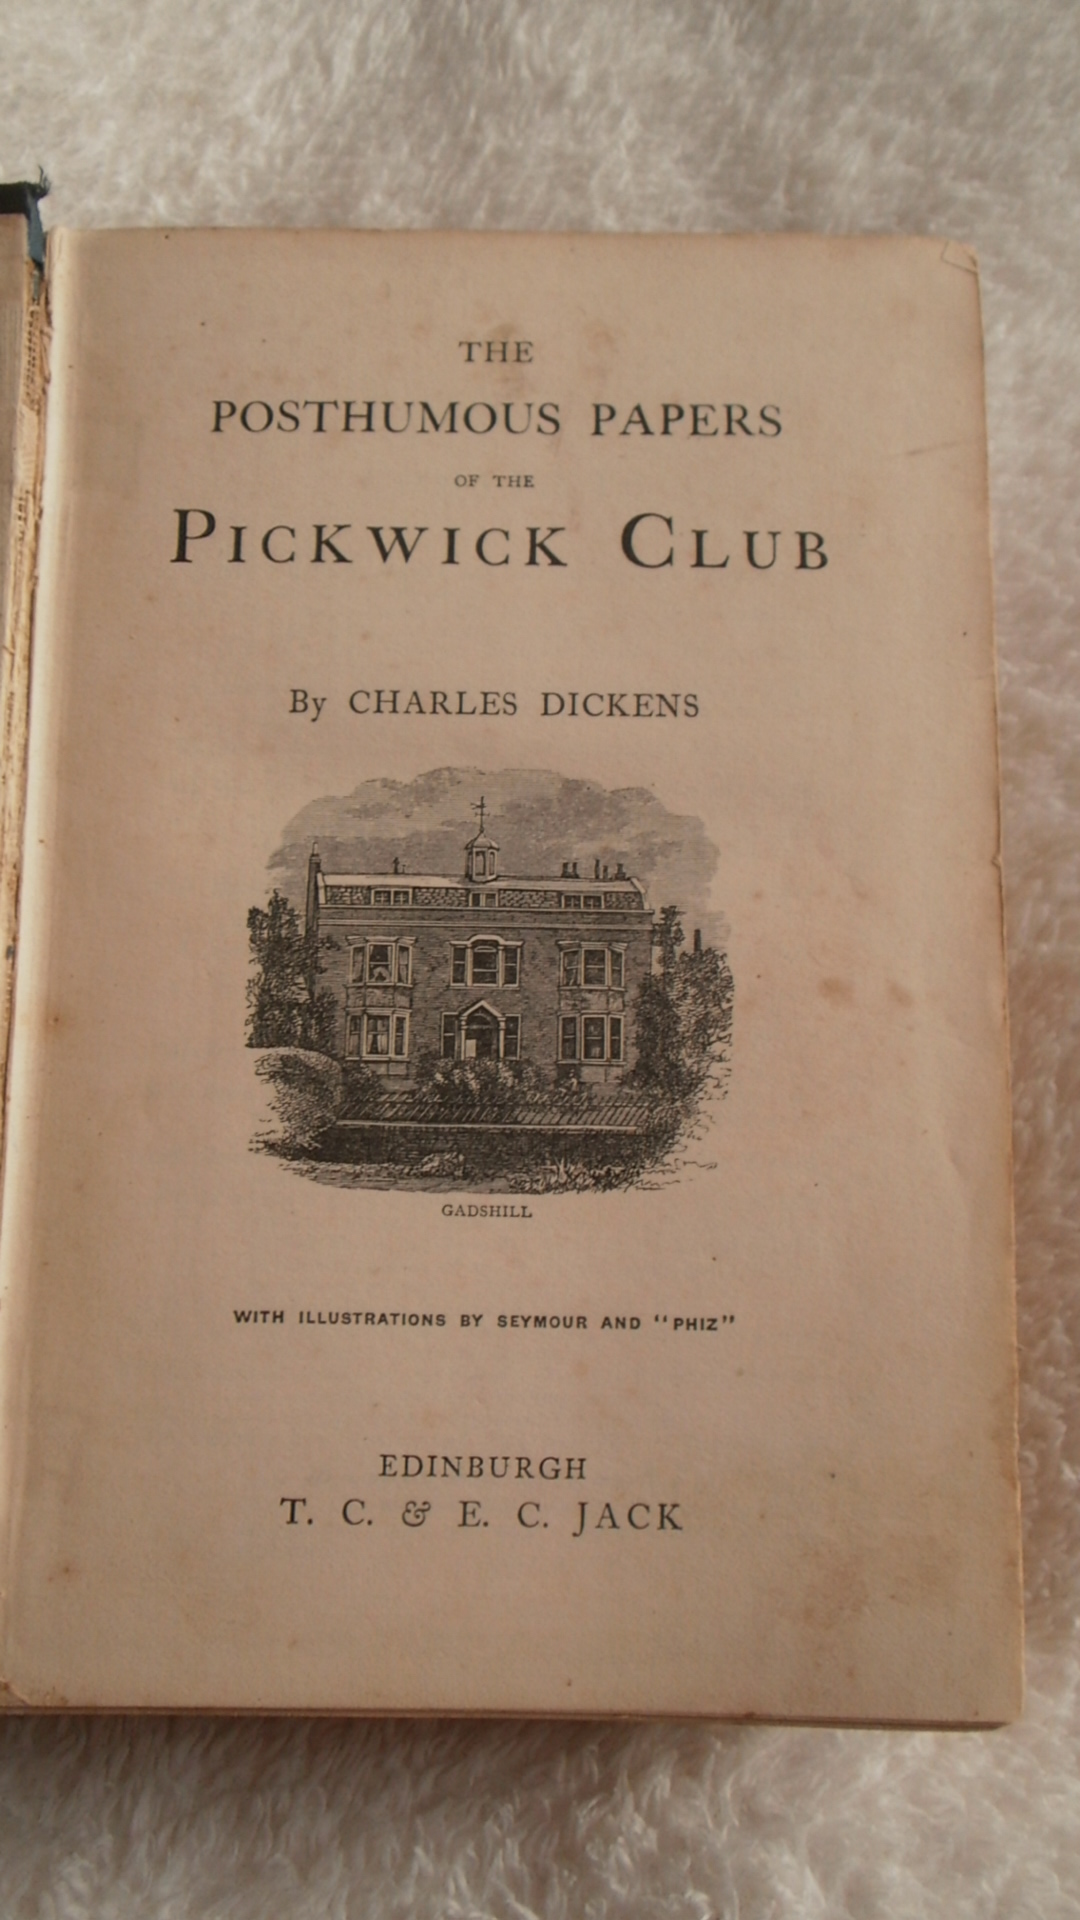 the pickwick papers sparknotes